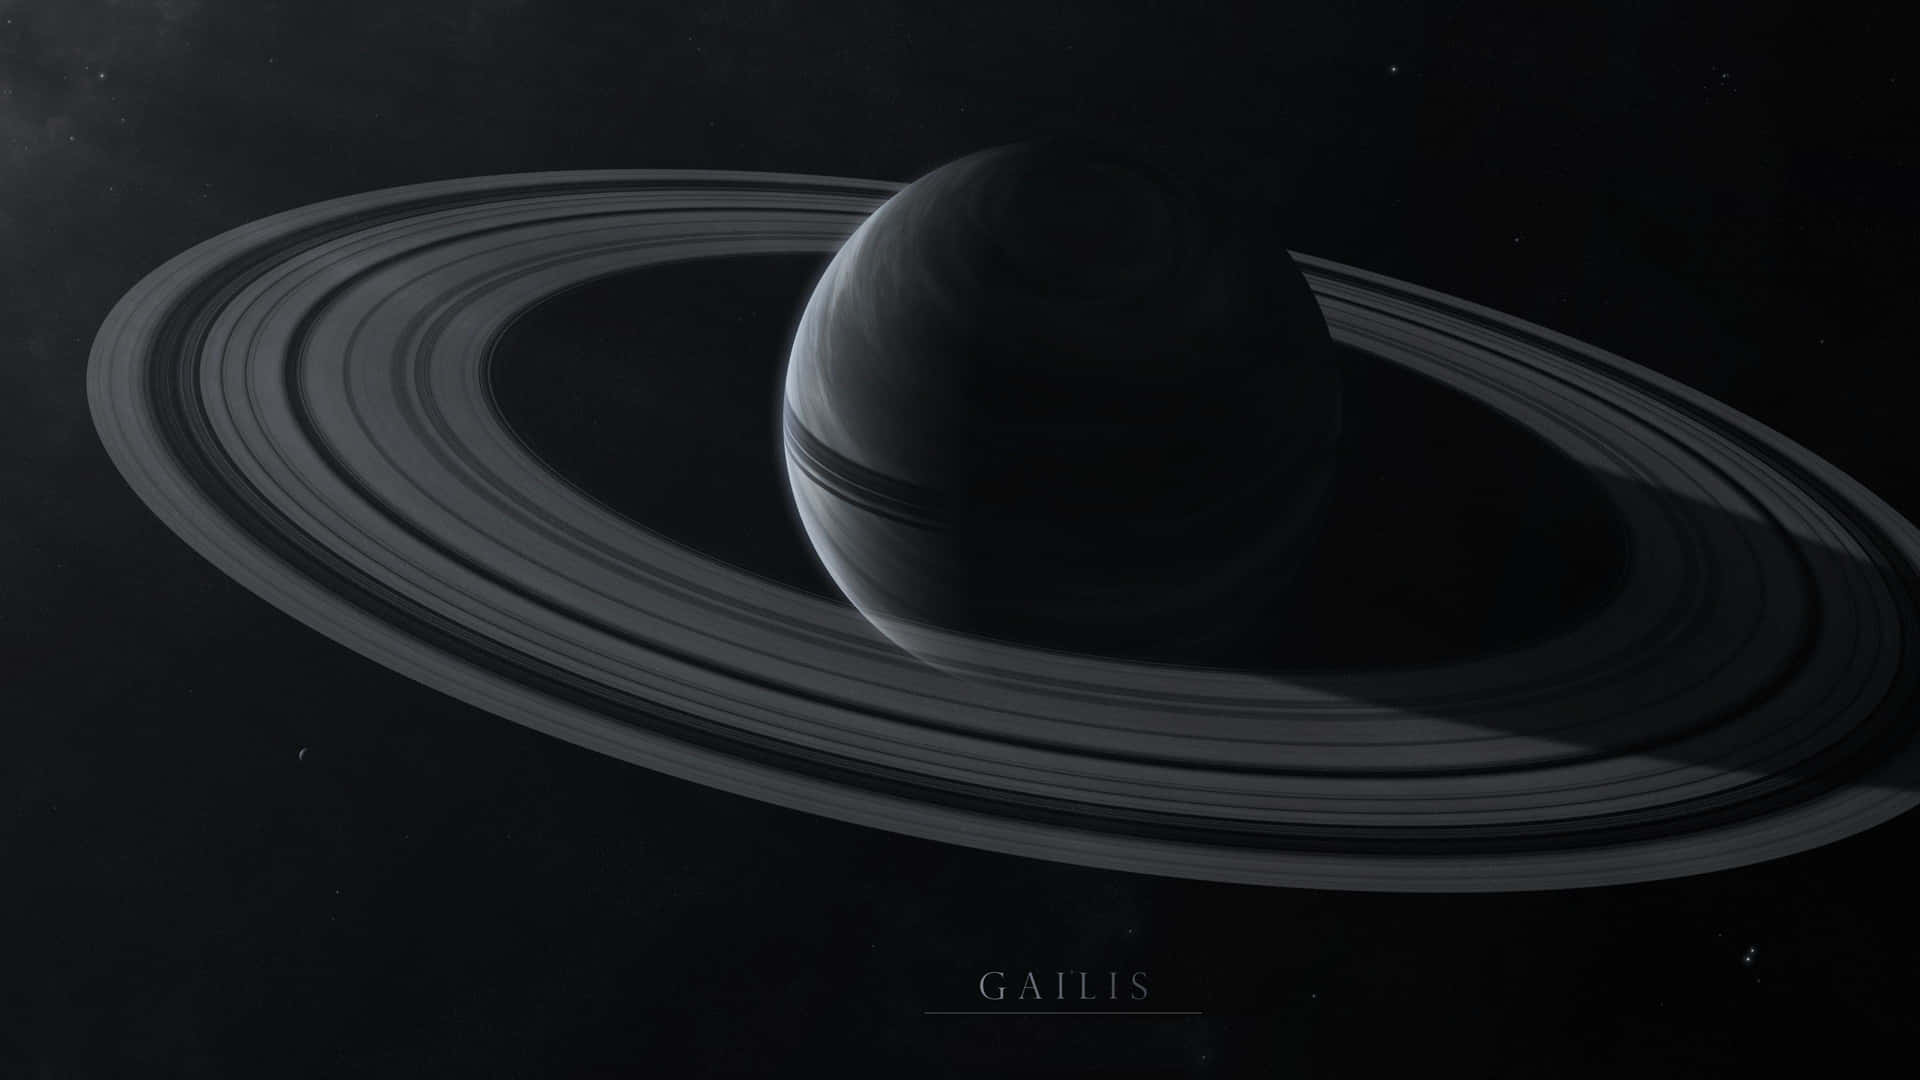 Explore the darkness of Black Space Wallpaper